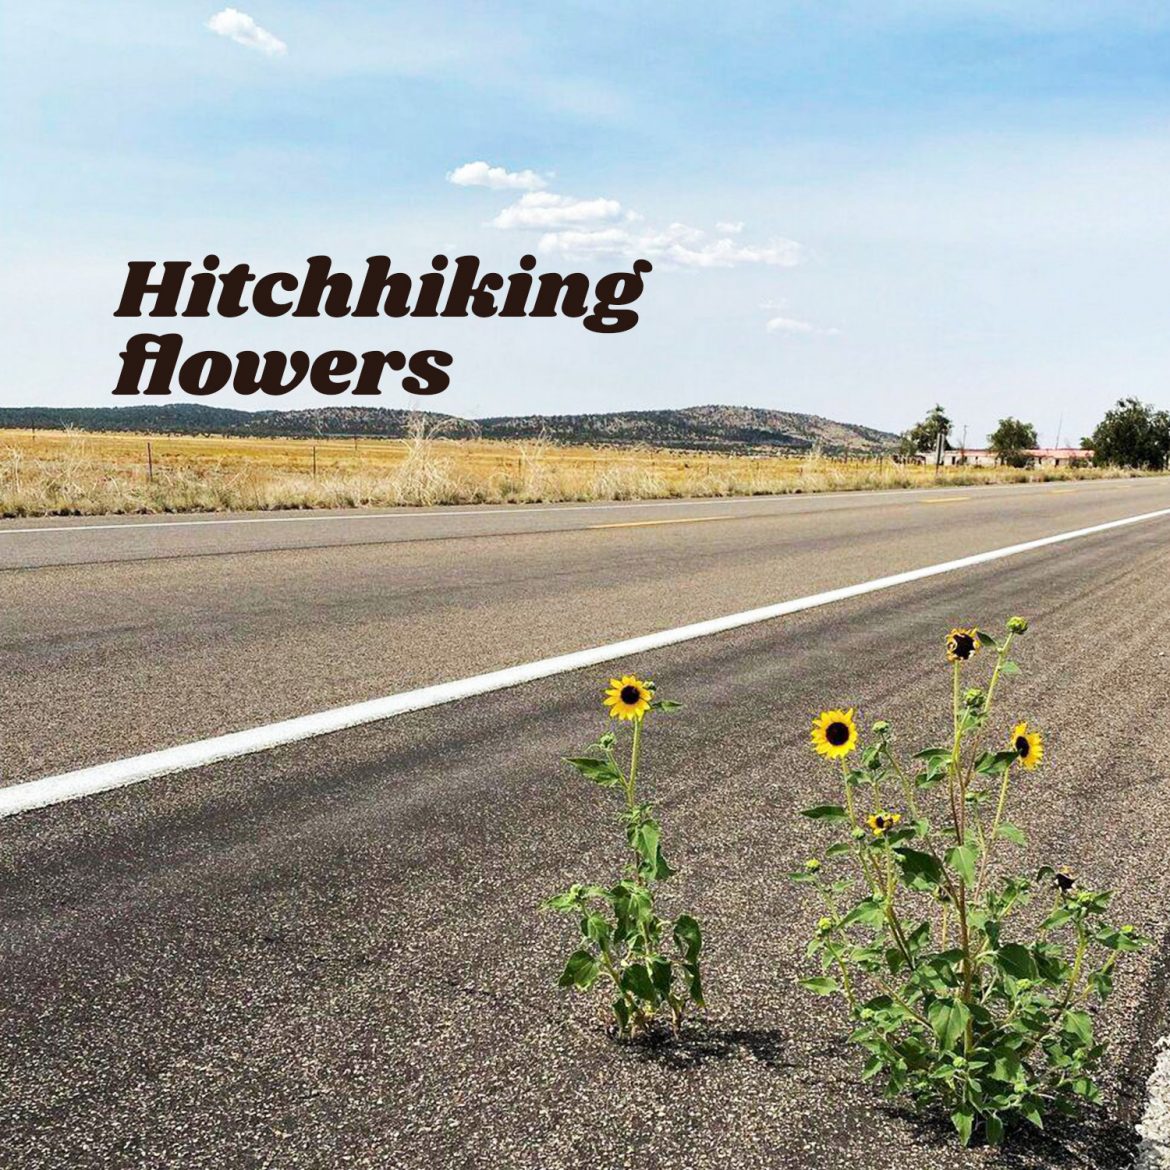 Hitchhiking flowers